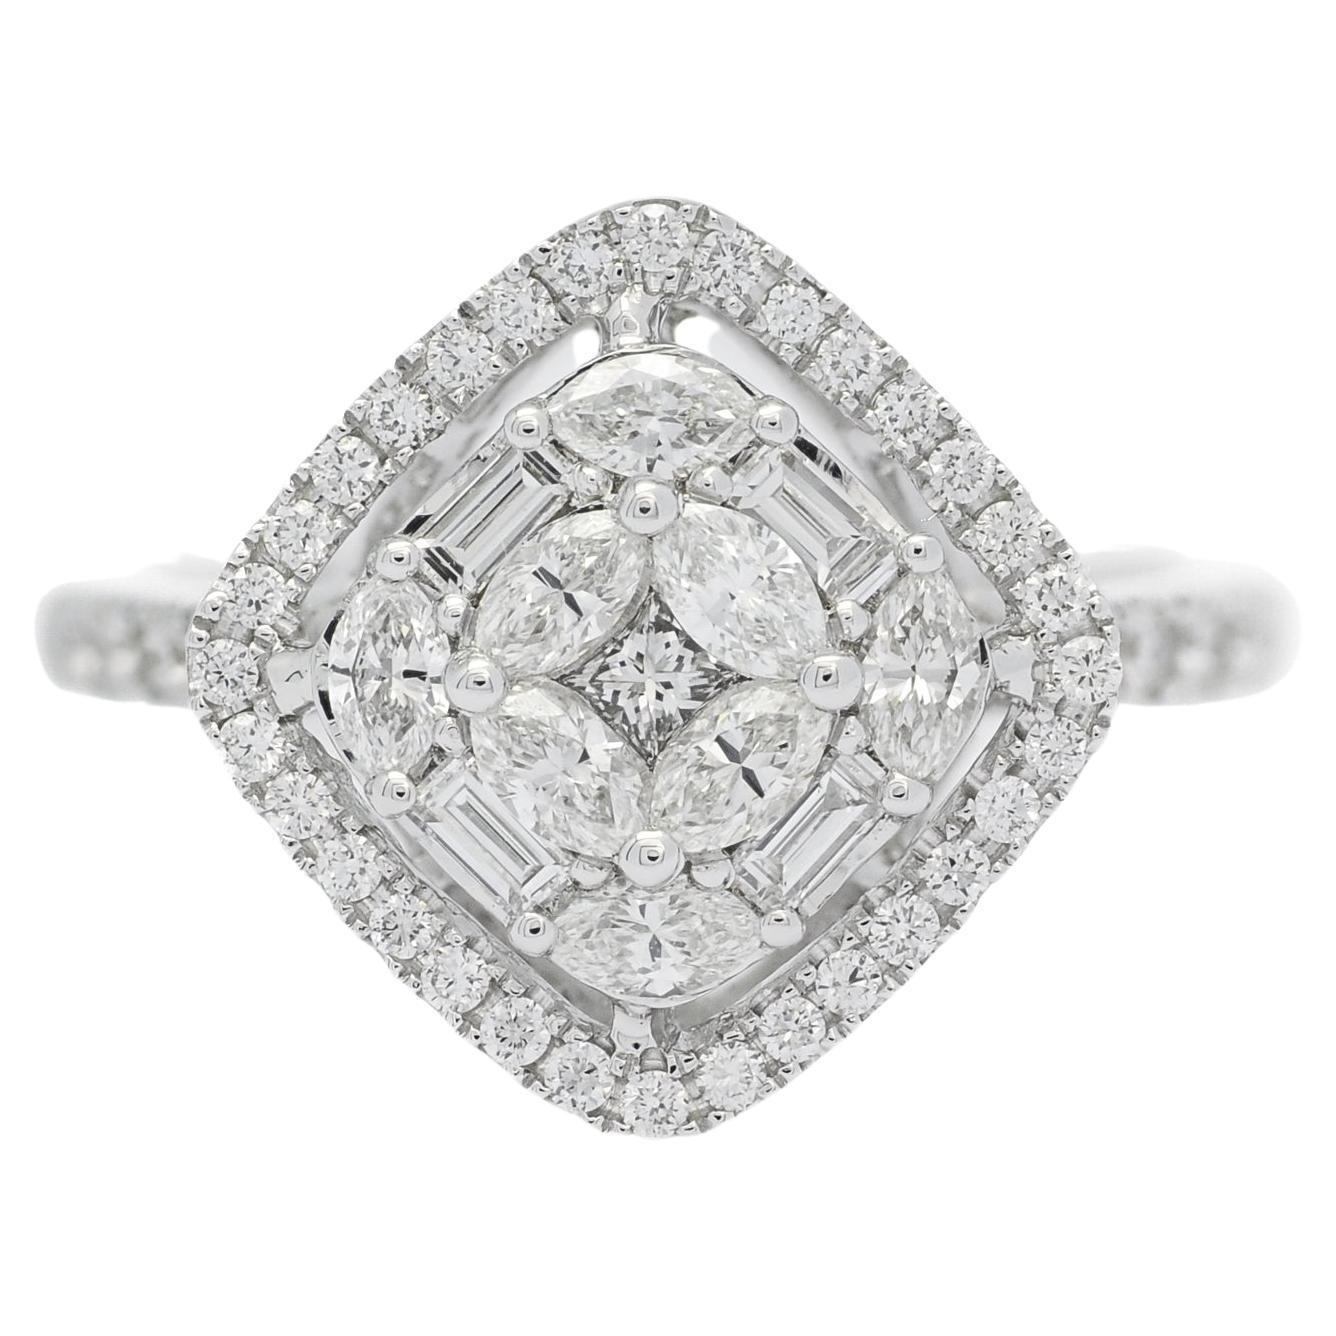  Natural Diamonds 1.00 carats 18KT White Gold Cluster Statement Ring